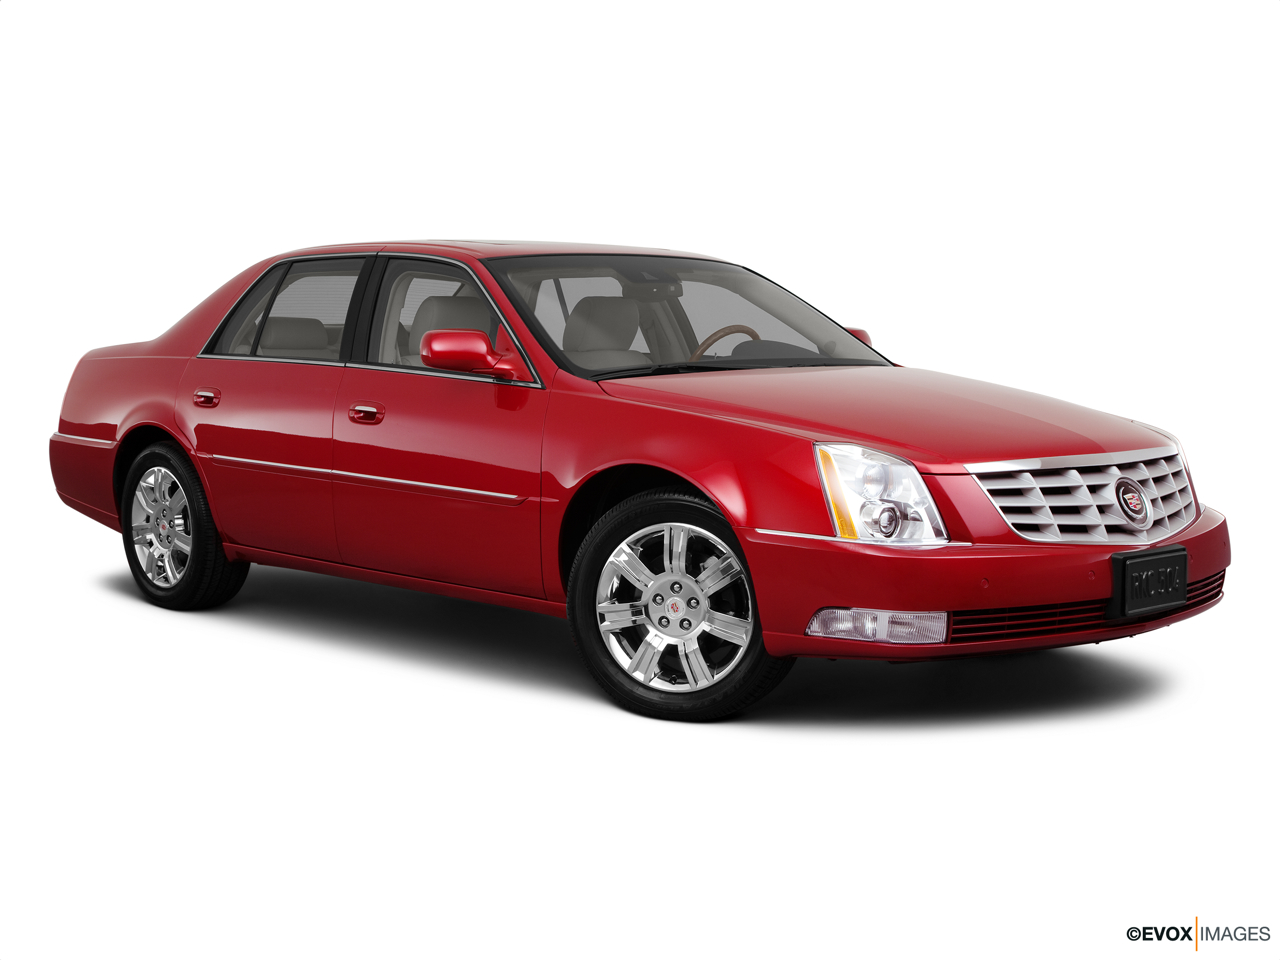 2011 Cadillac DTS Platinum Front passenger 3/4 w/ wheels turned. 